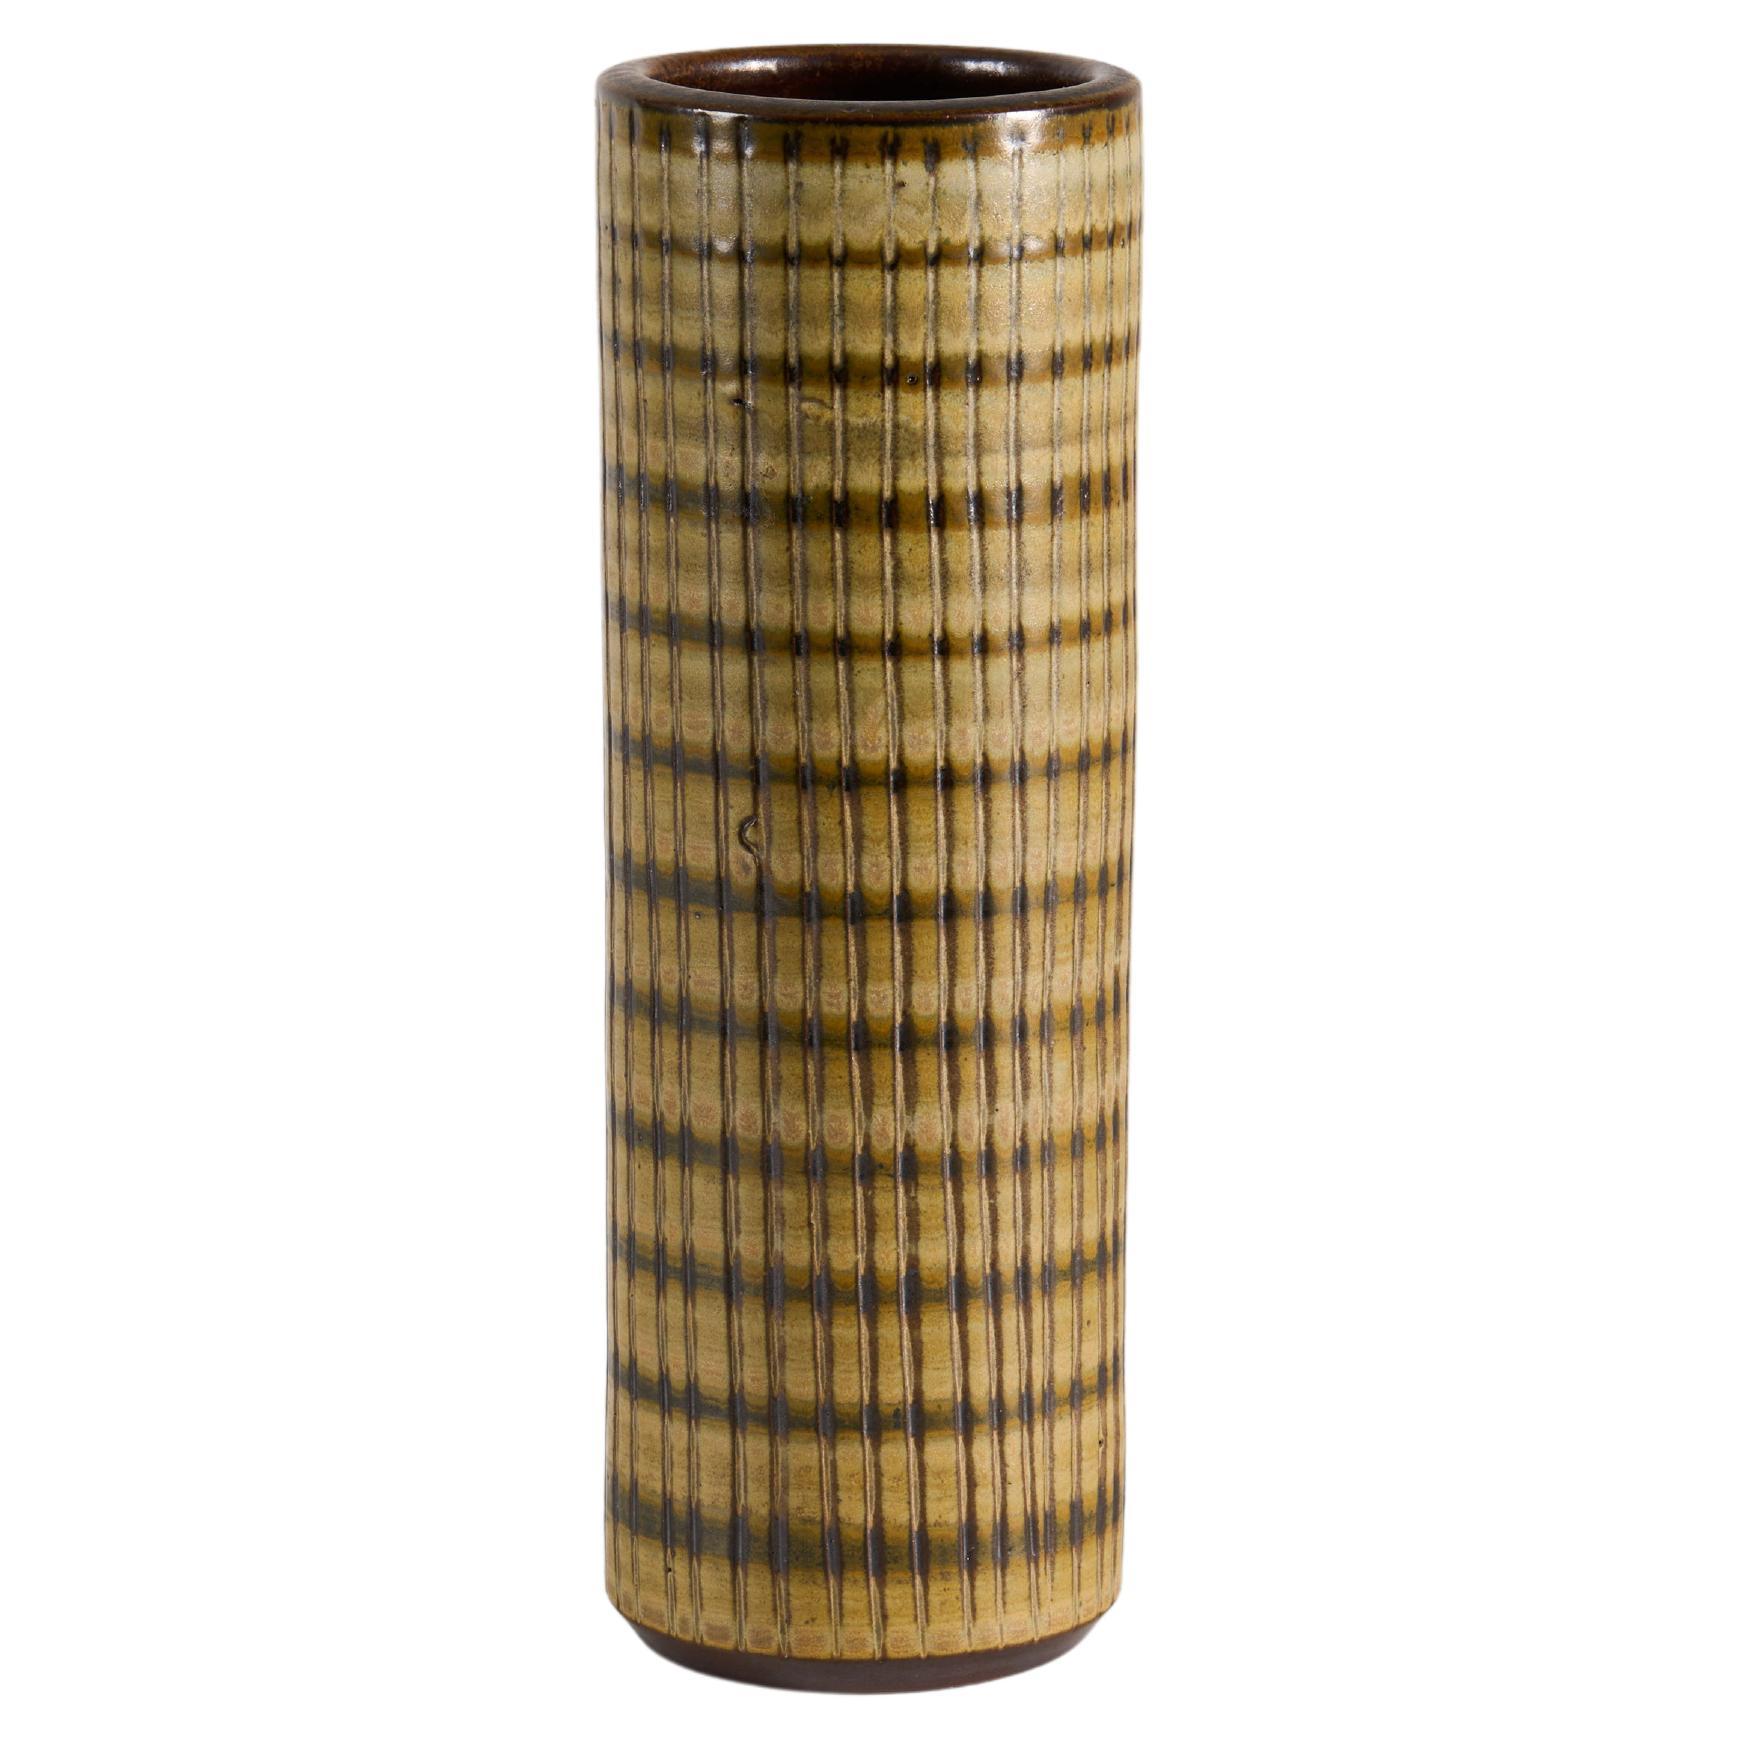 Cylindrical Ceramic Vase with Earth-Toned Glaze, Wallåkra, Sweden, 1960s